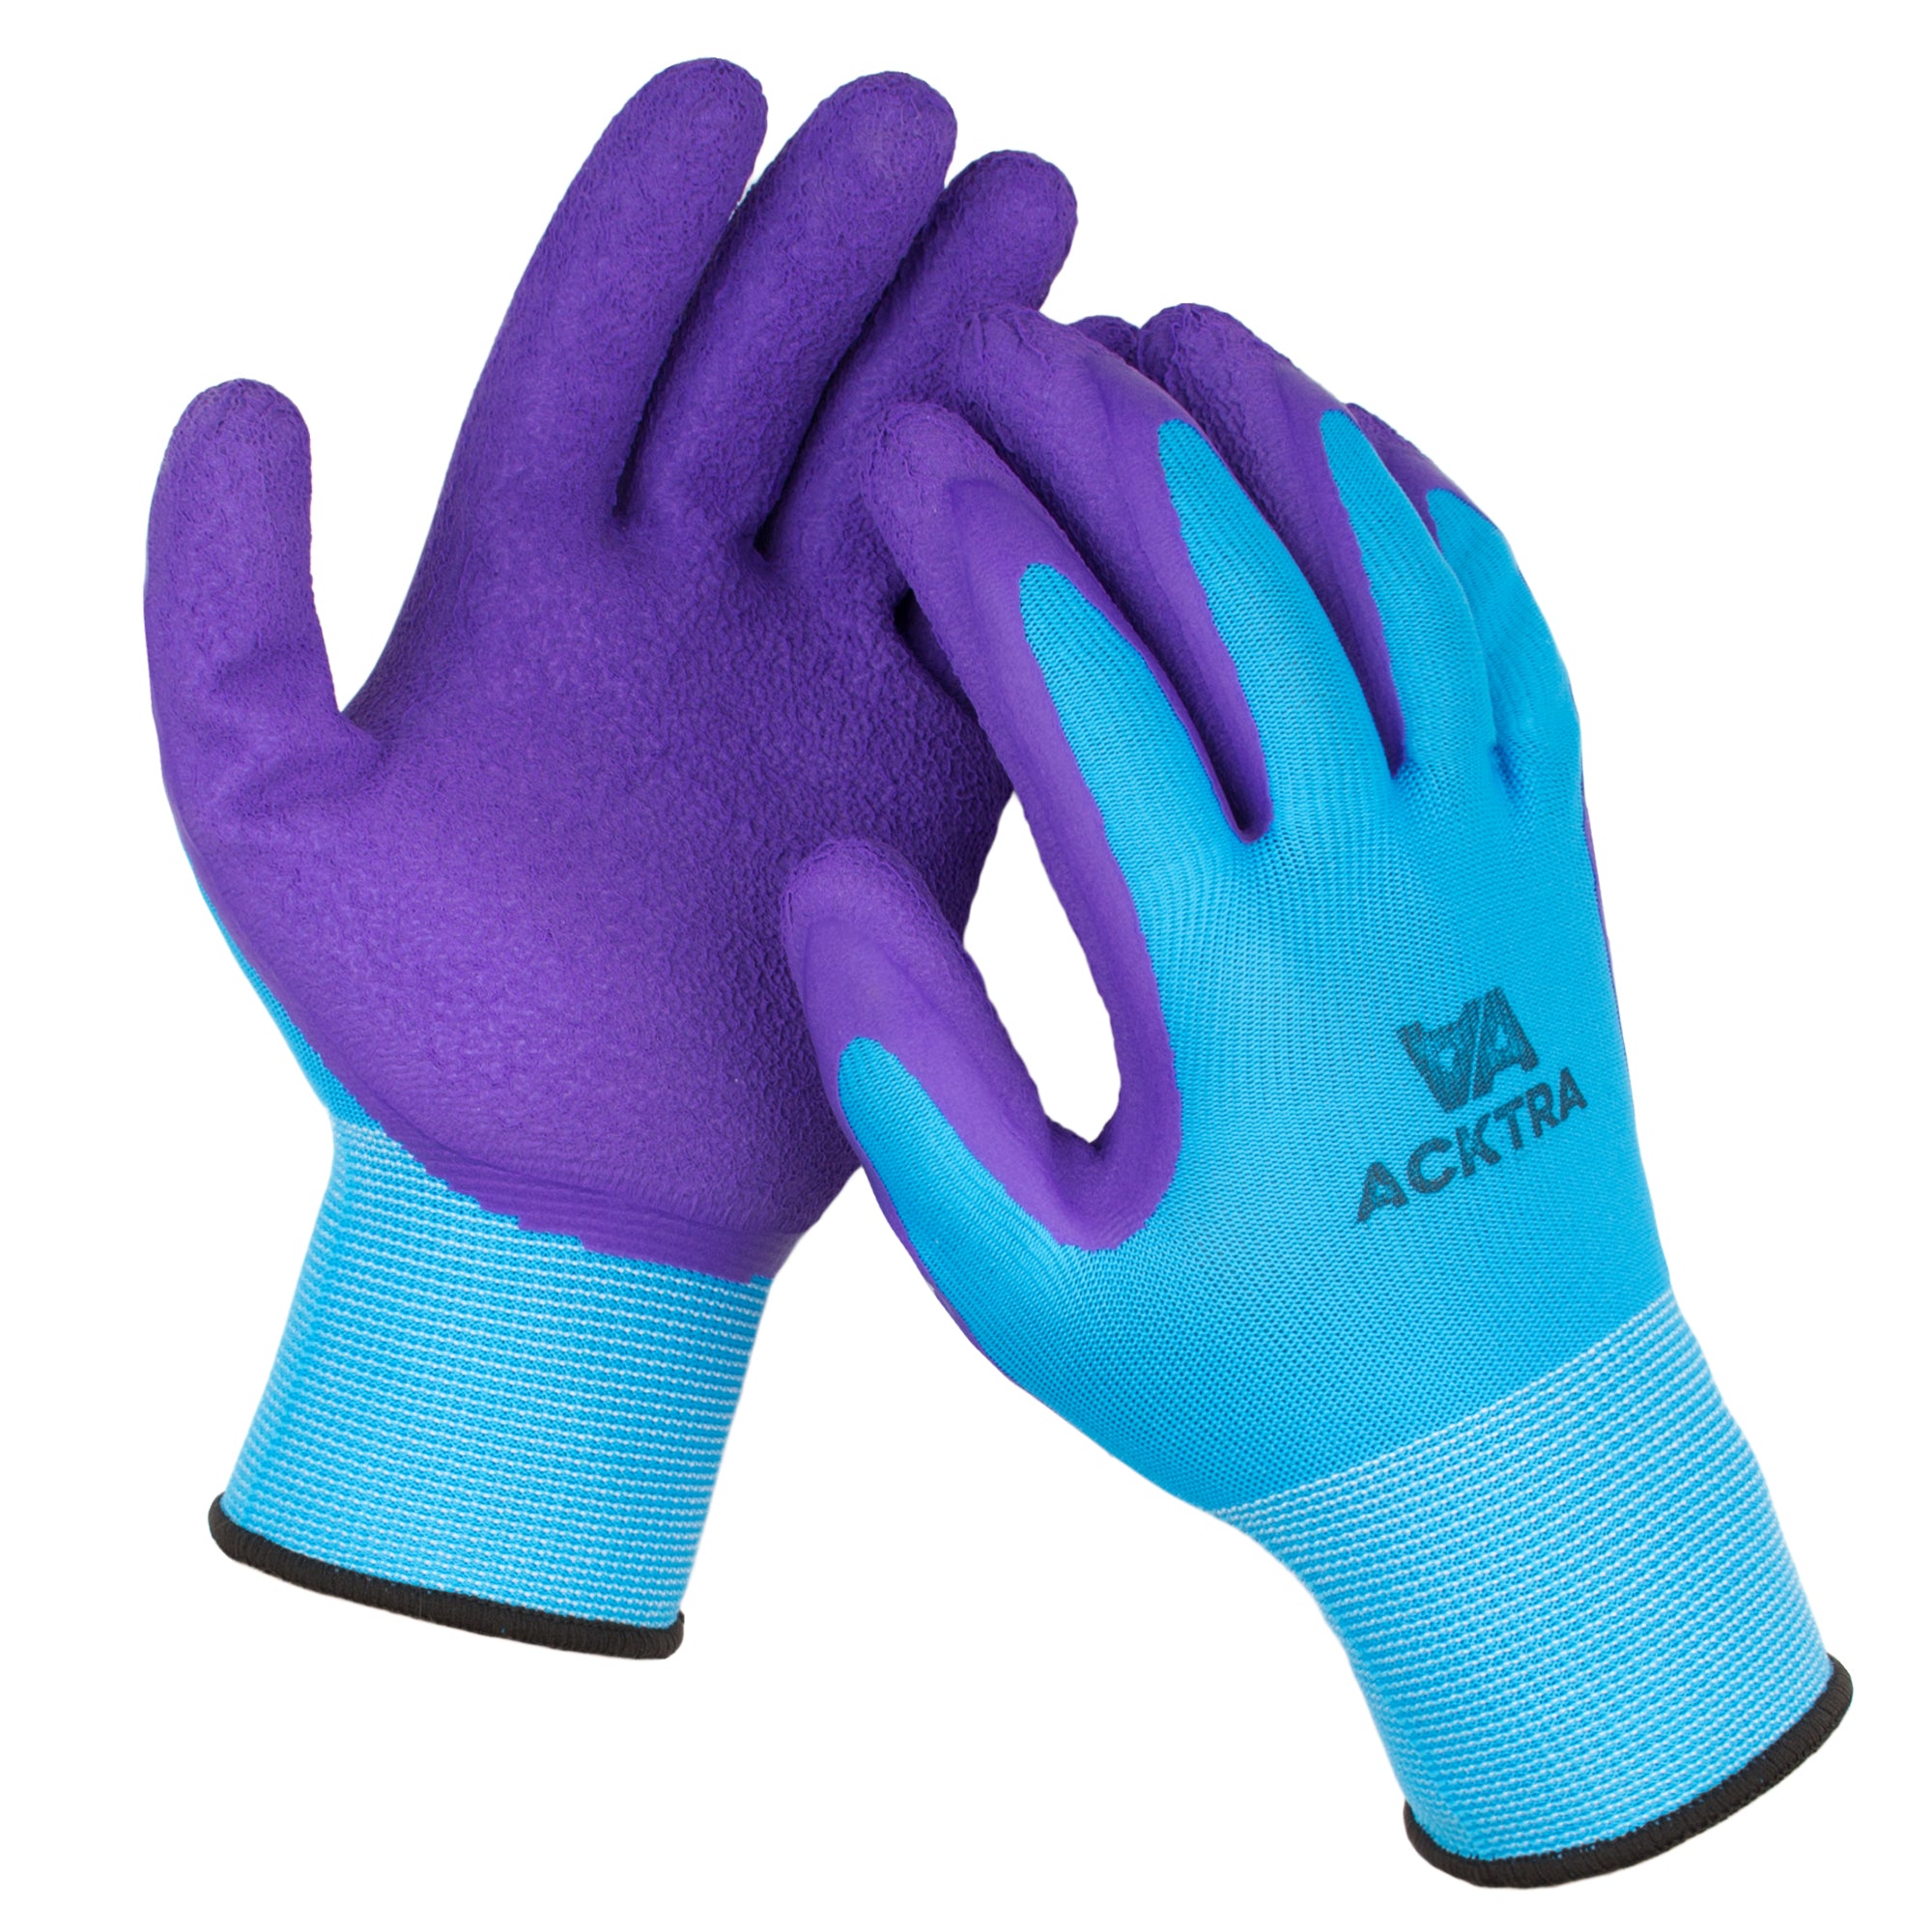 https://acktra.com/cdn/shop/products/Coated_Nylon_Safety_WORK_GLOVES_Blue_Polyester_Purple_Latex_1024x1024@2x.jpg?v=1560633716